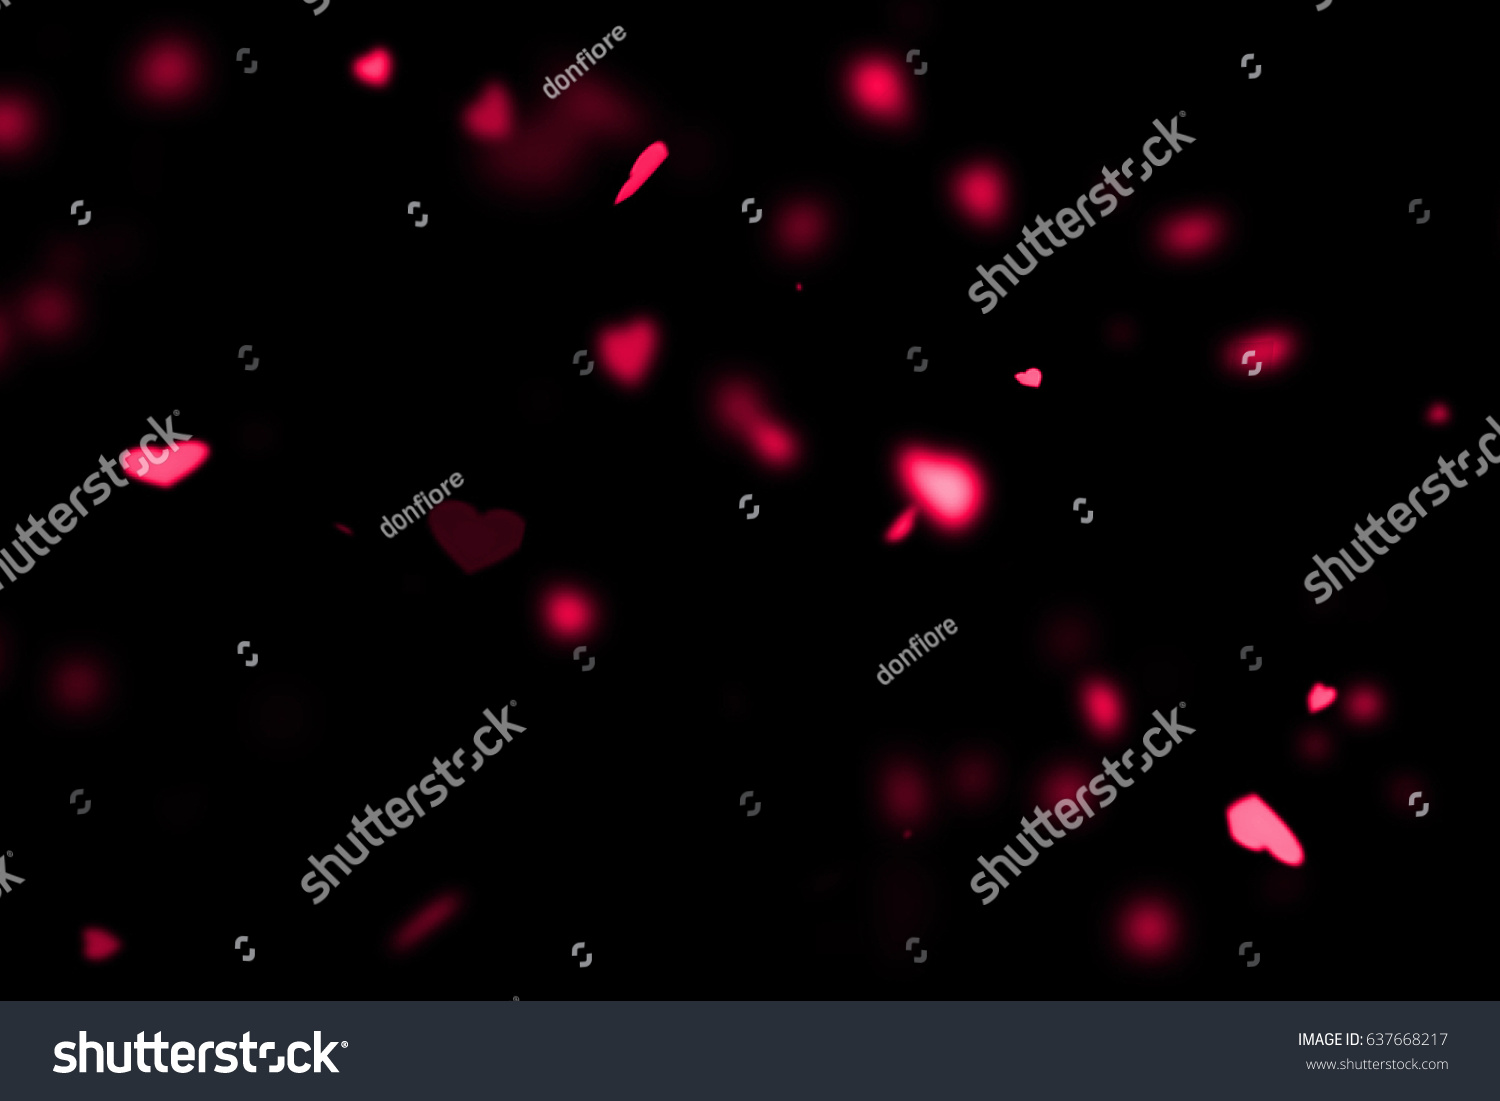 purple colorful hearts flying animation on black background, love and valentine day concept #637668217